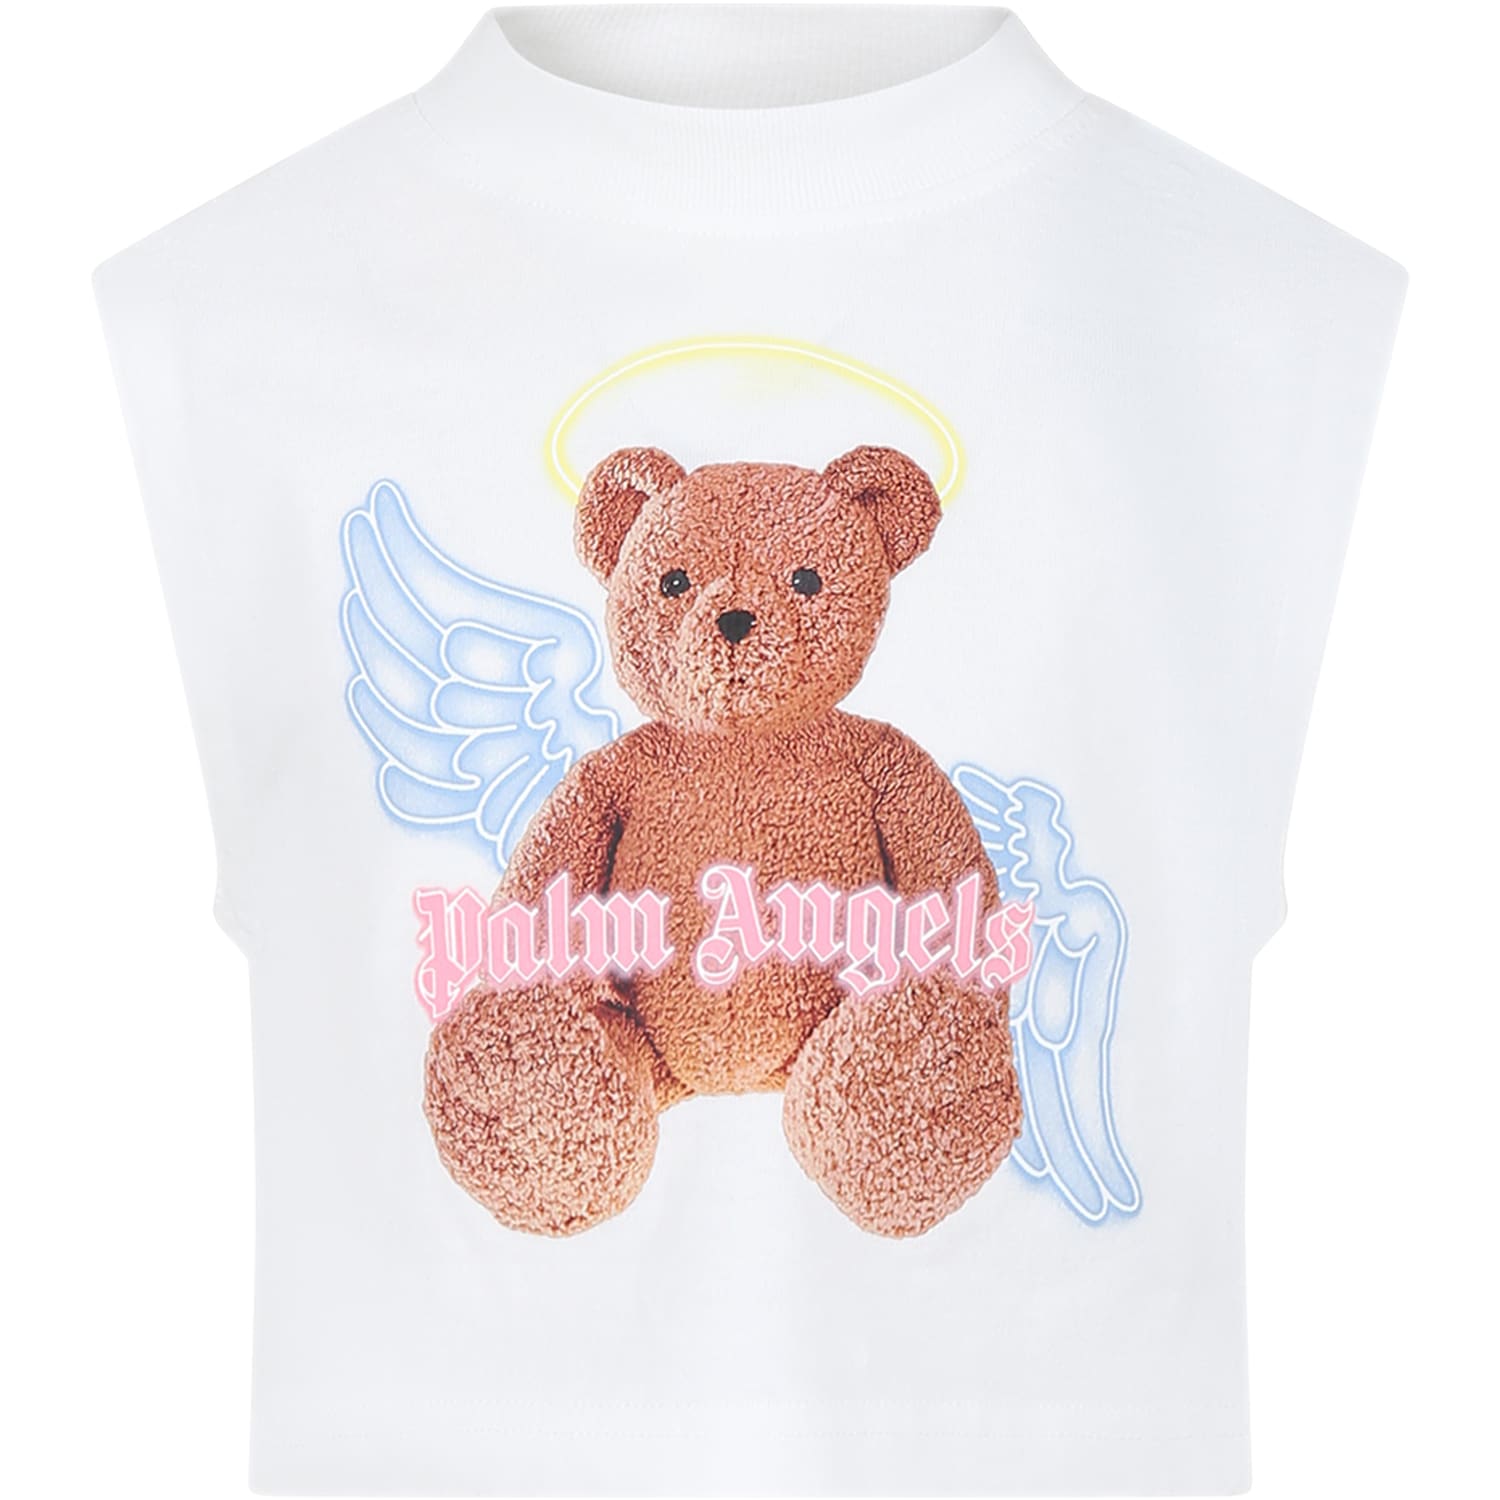 Palm Angels Kids' White Tank Top For Girl With Bear